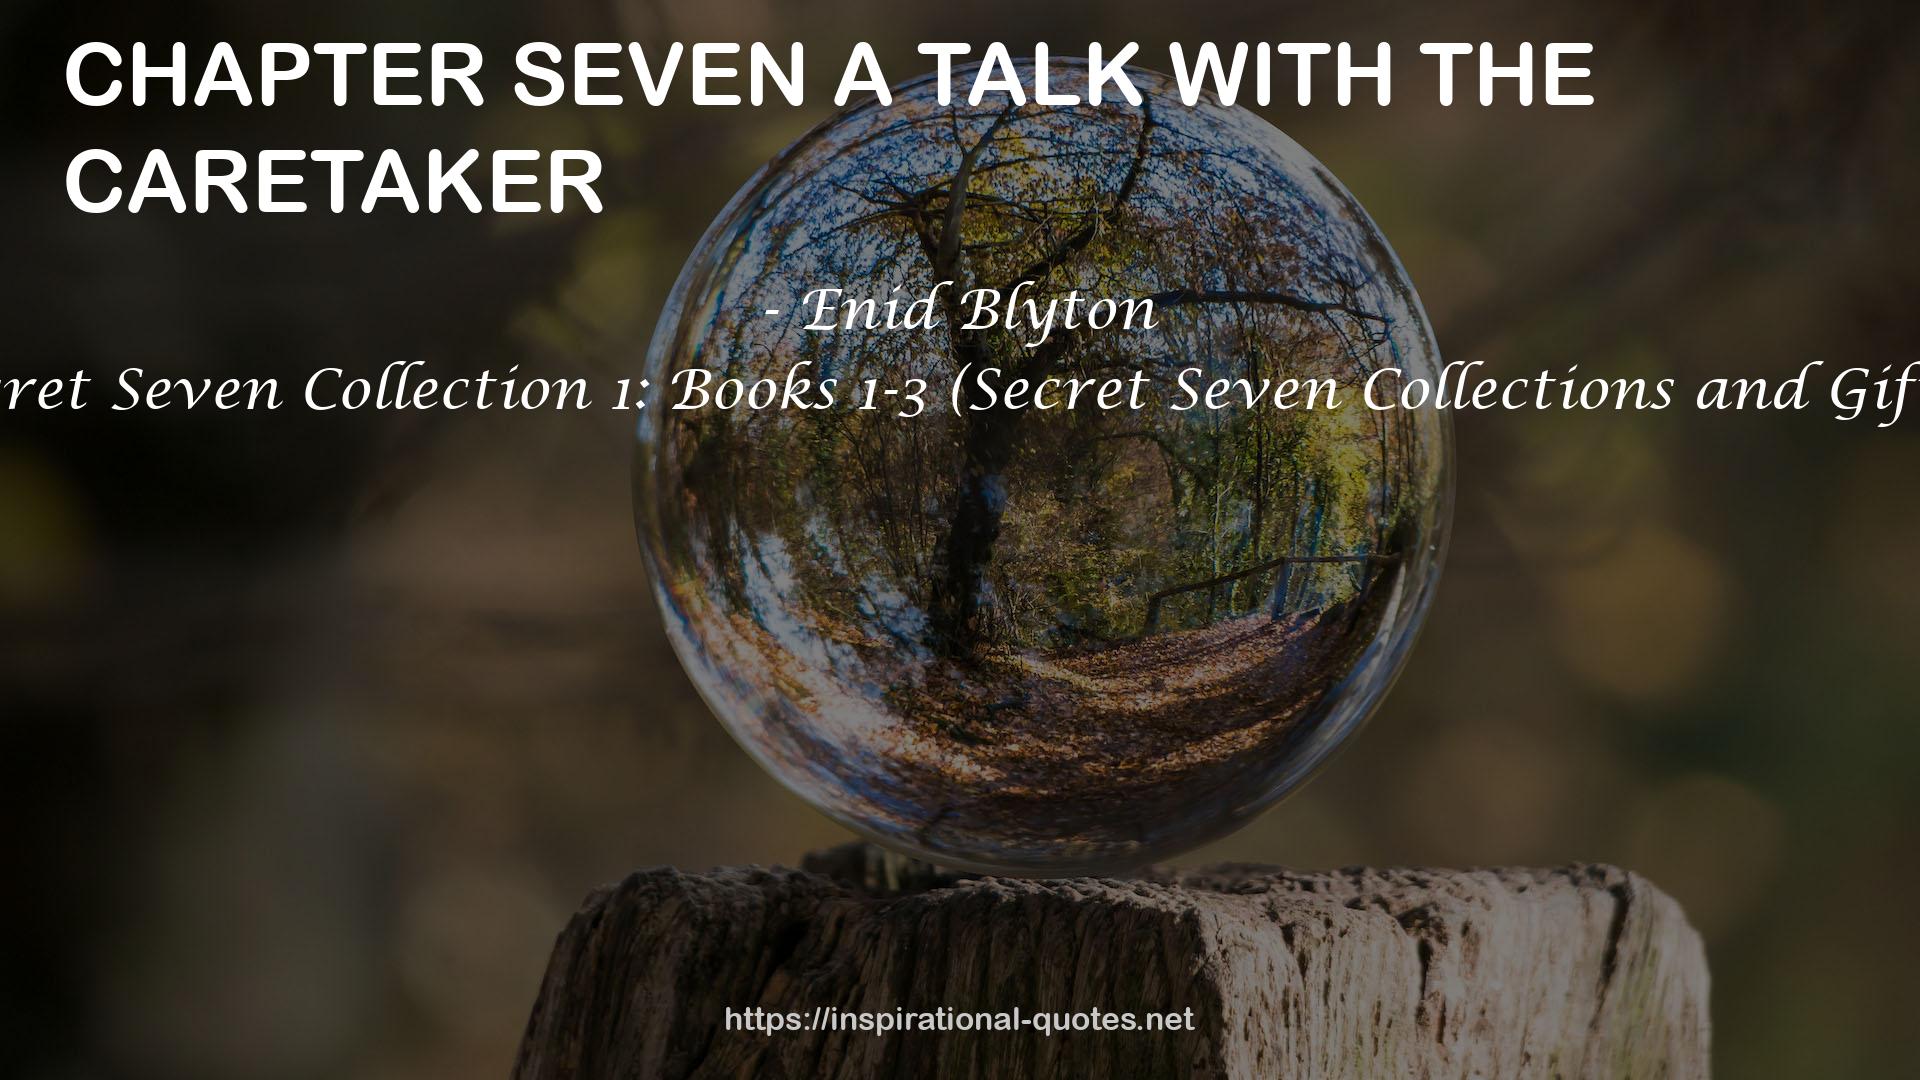 The Secret Seven Collection 1: Books 1-3 (Secret Seven Collections and Gift books) QUOTES